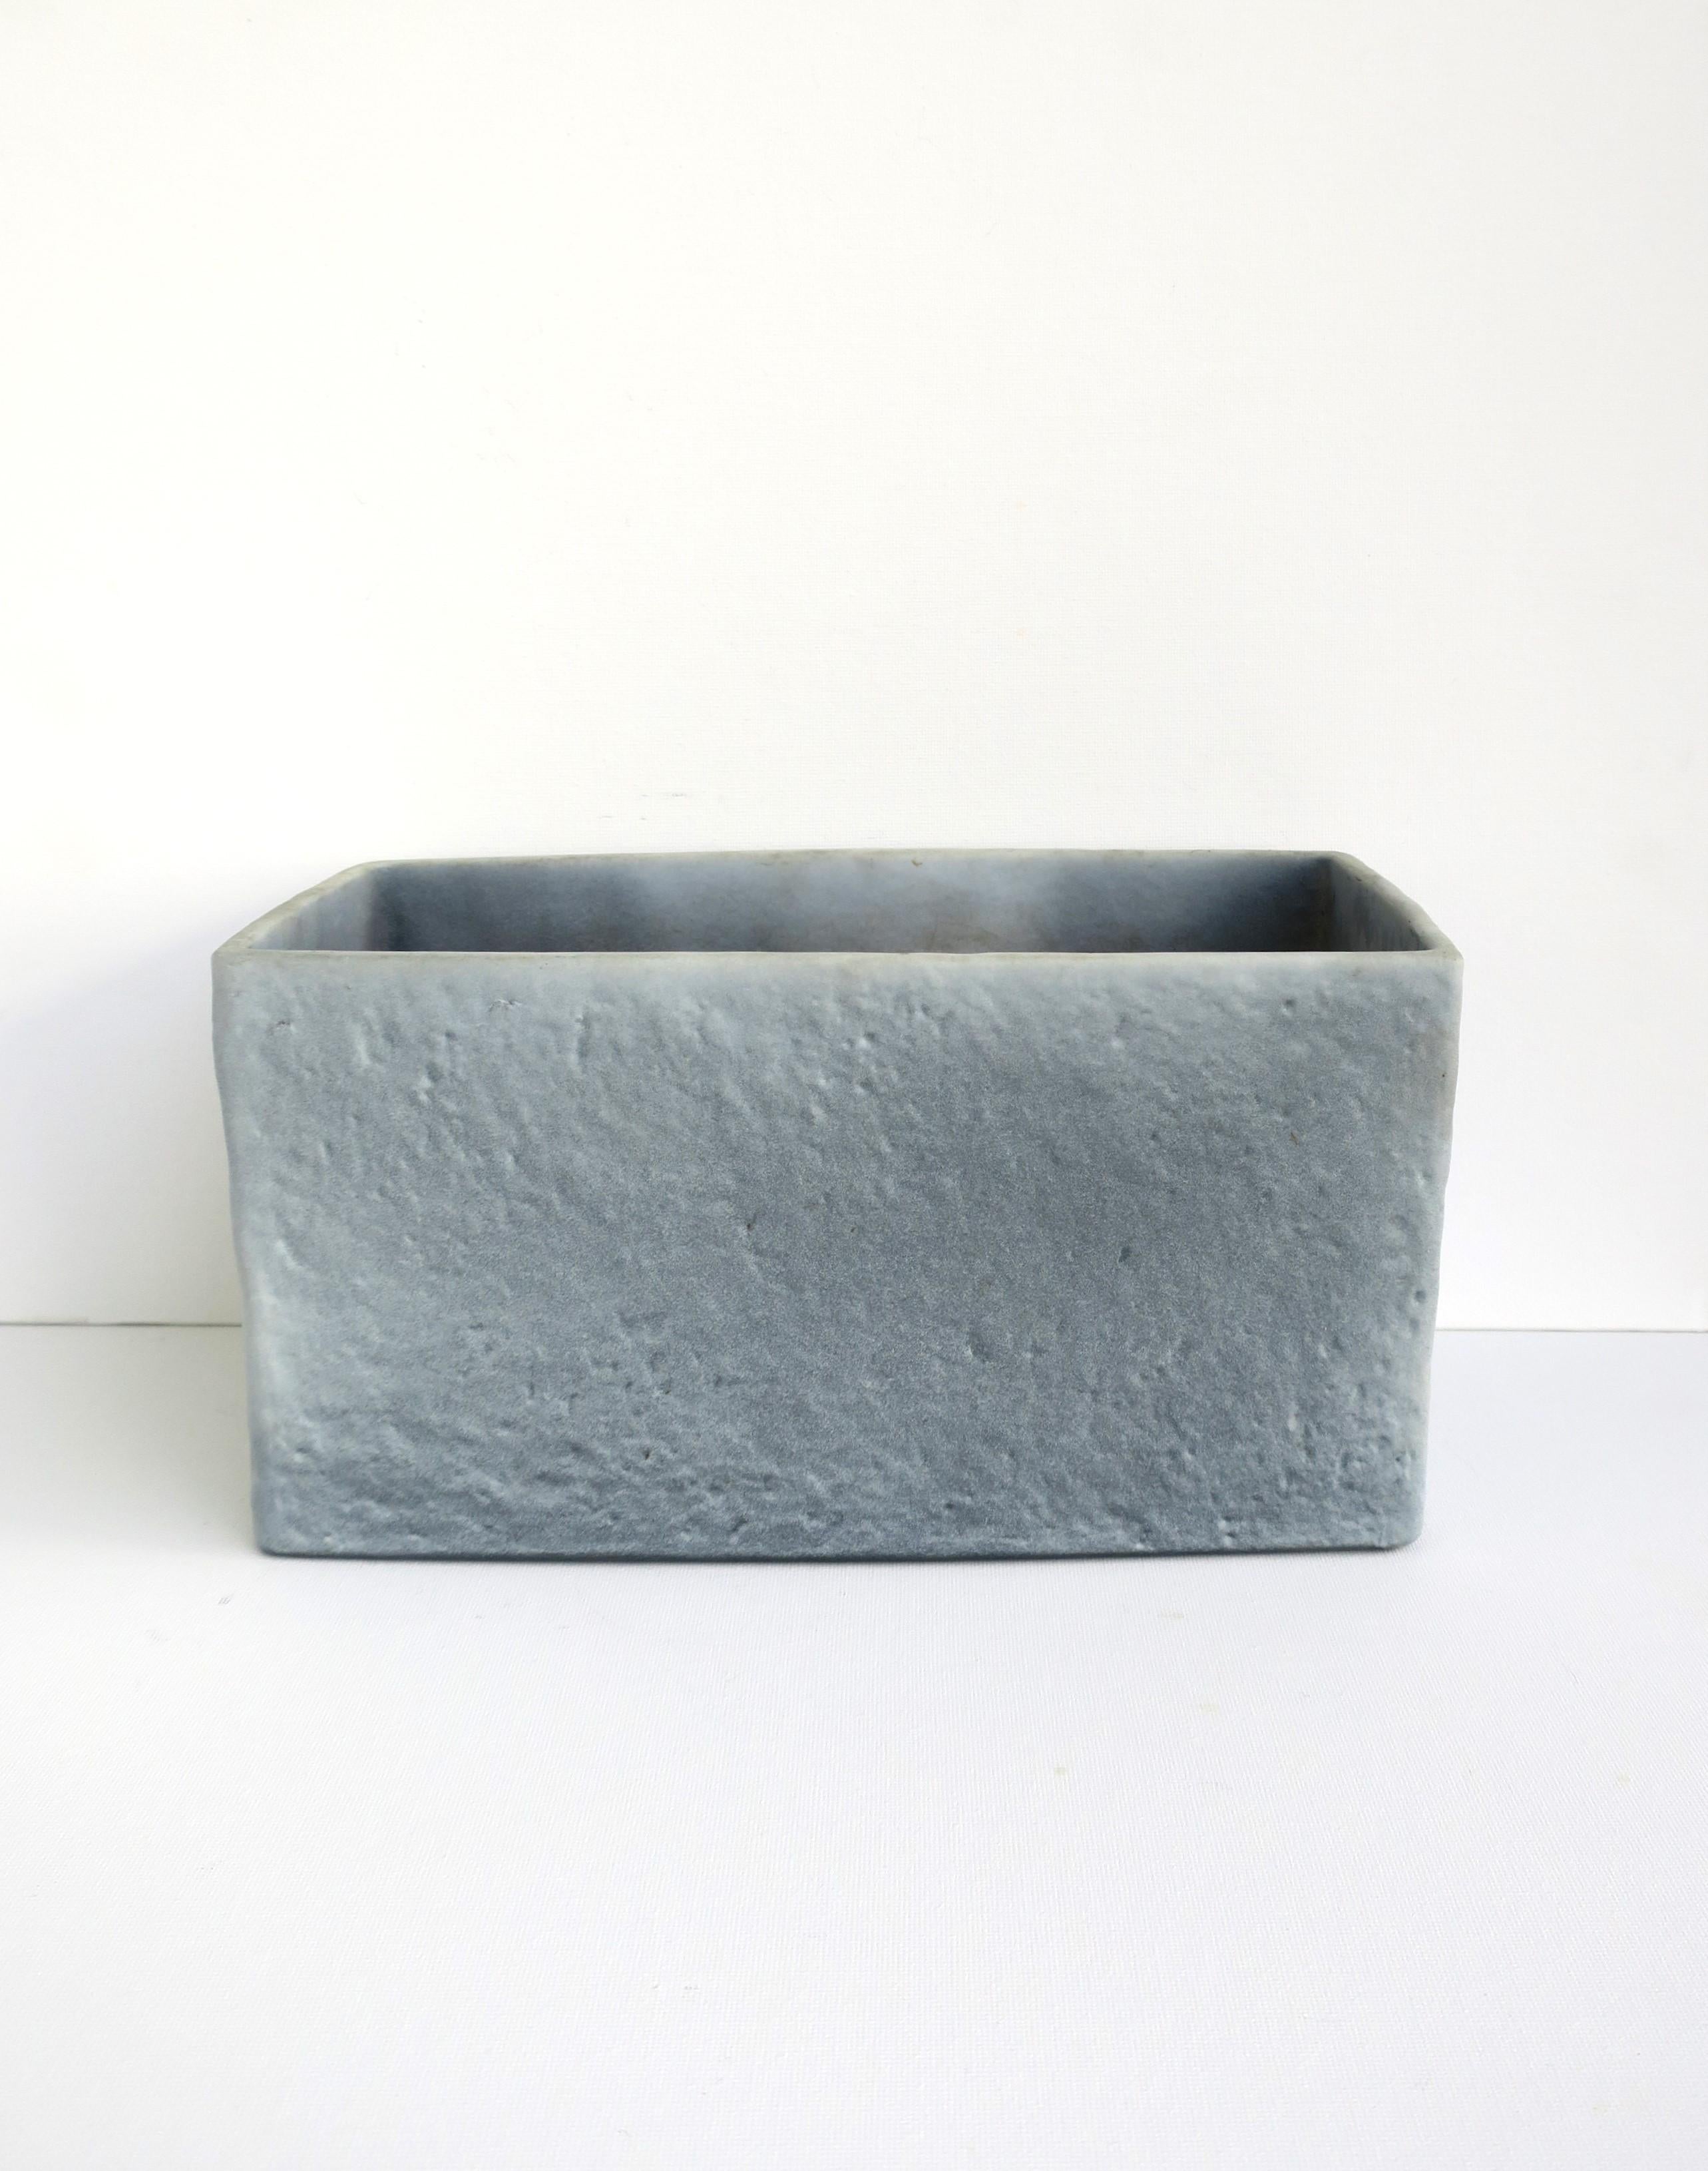 A German ceramic flower or plant planter cachepot jardinière, circa mid-20th century, Germany. Piece is rectangular in shape with a matte but textured exterior, in a muted blue hue with a slight ombre, in the modern or Minimalist styles. Beautiful